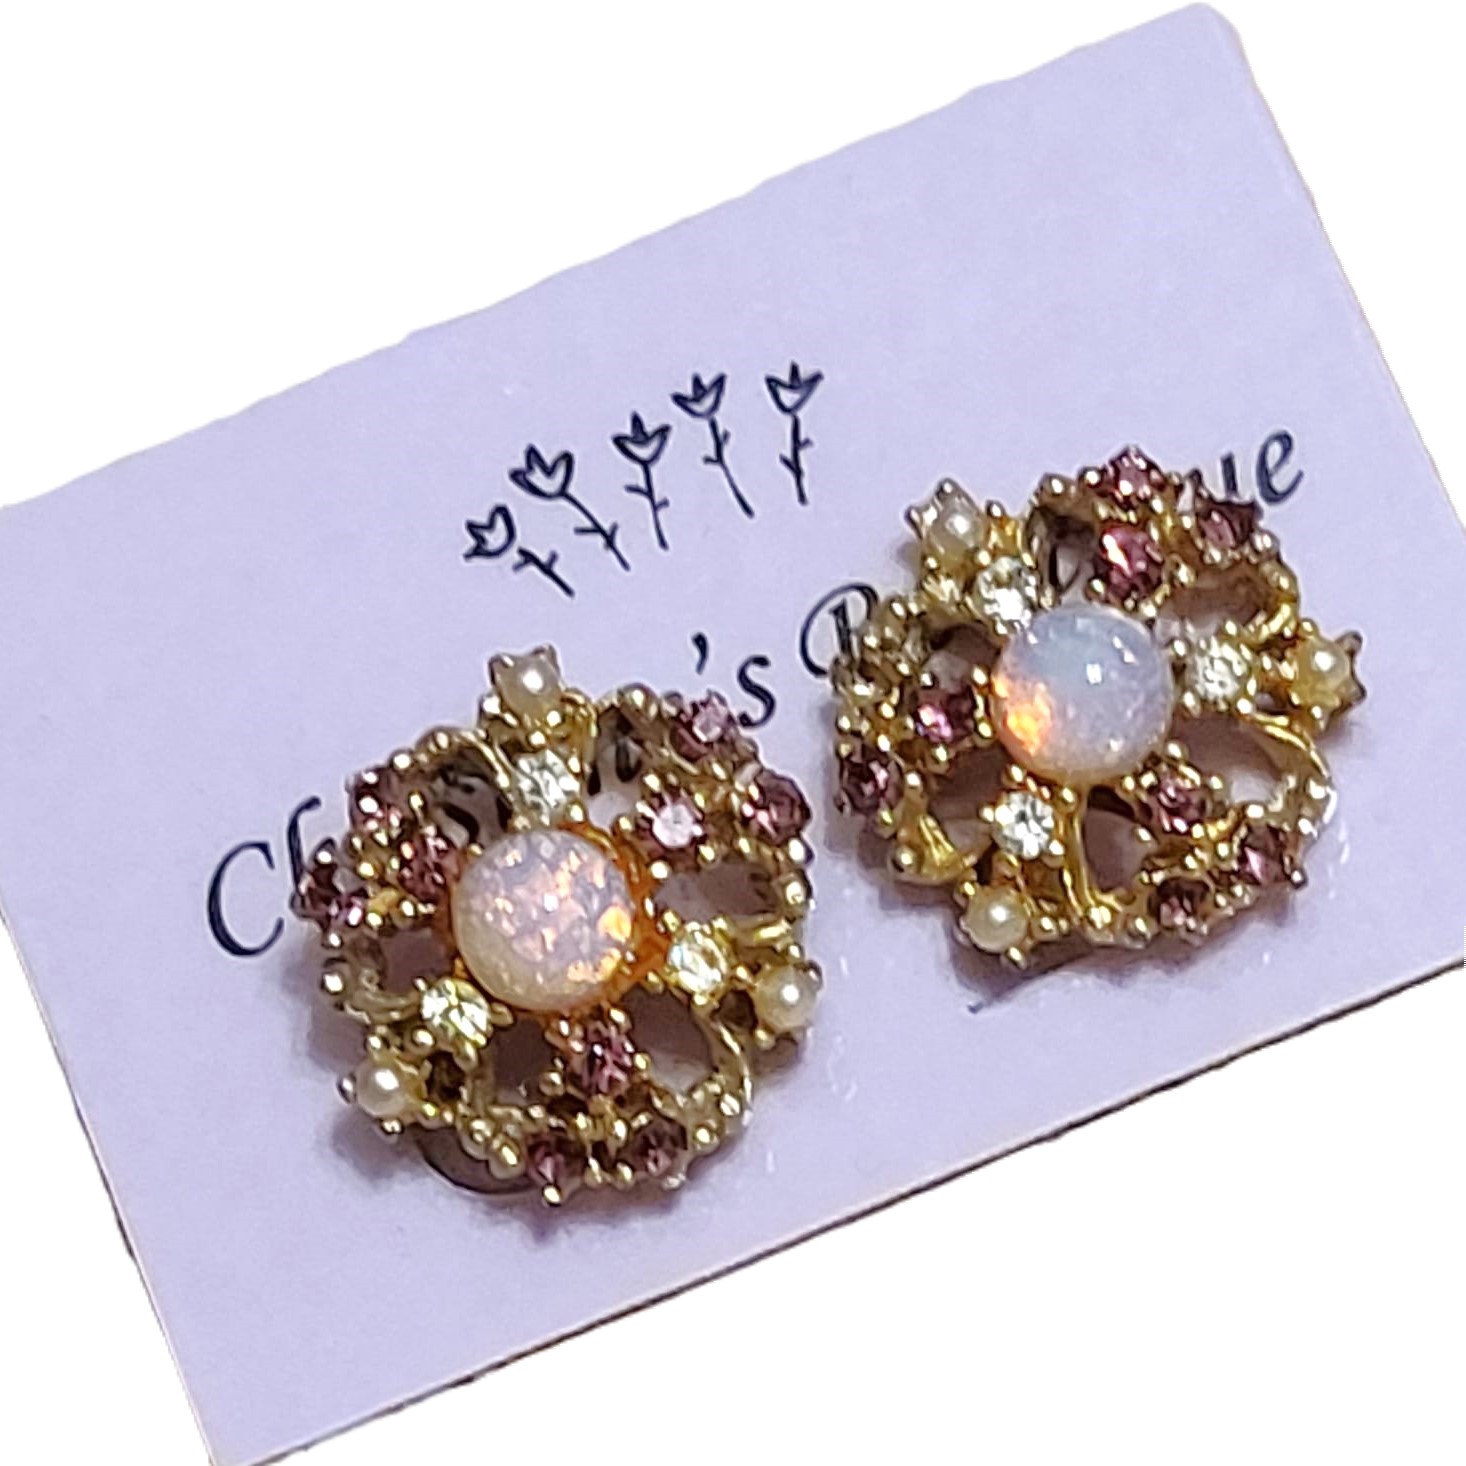 Purple rhinestone earrings with center pink foil cabachon, vintage screw back earrings